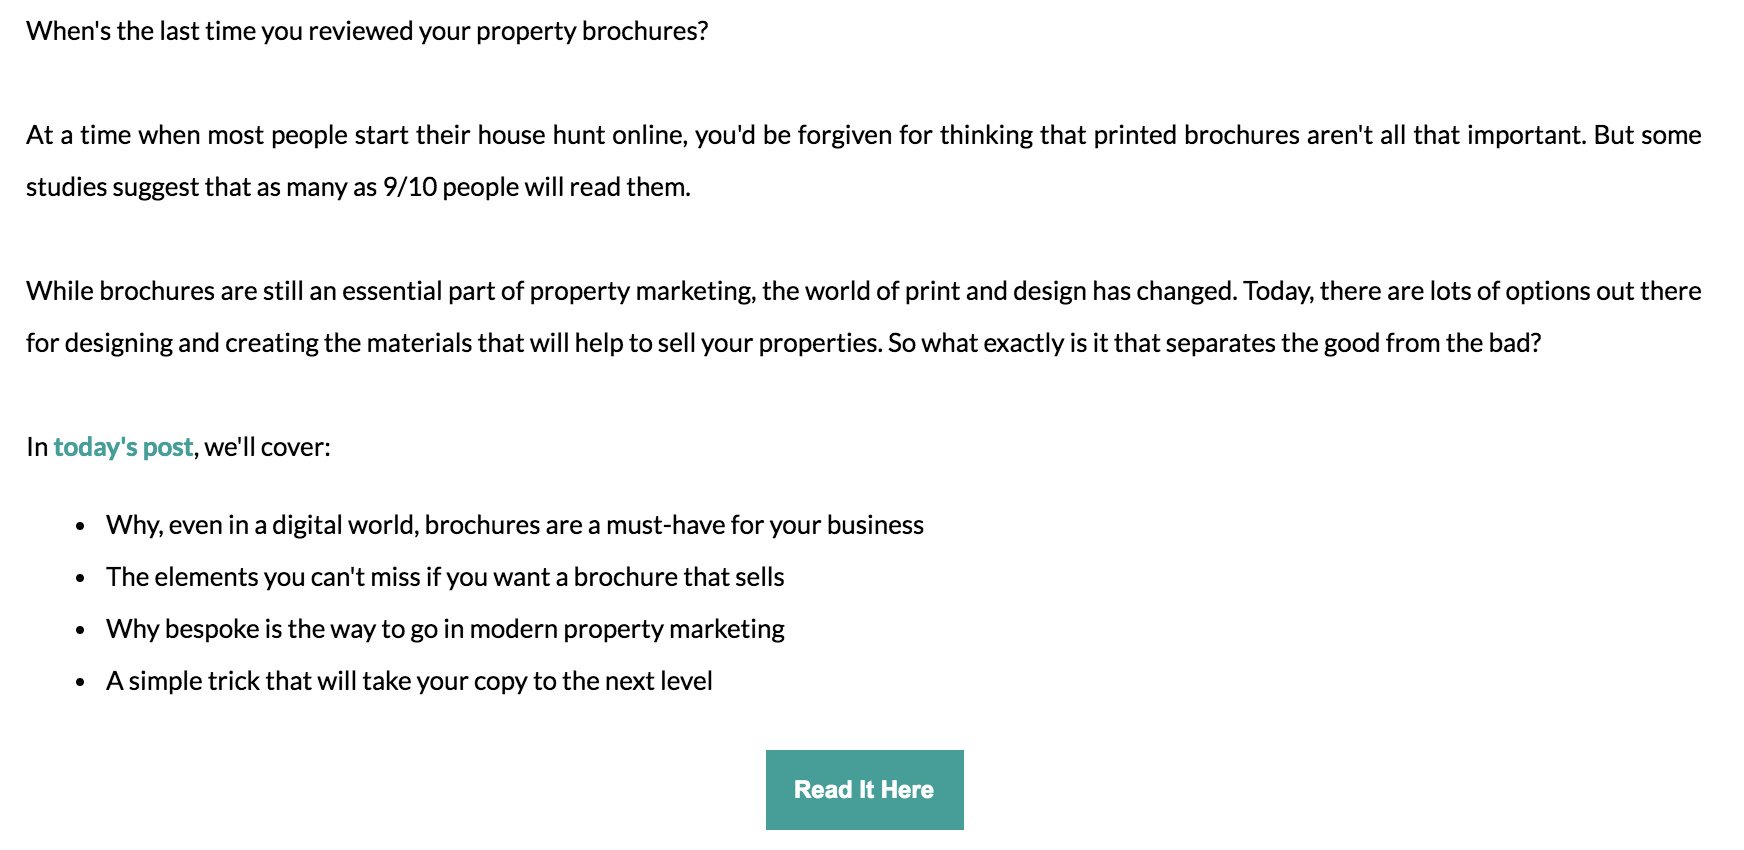 Content marketing for estate agents: A screenshot of an email newsletter showing how blog posts can be reused as content for your email list.